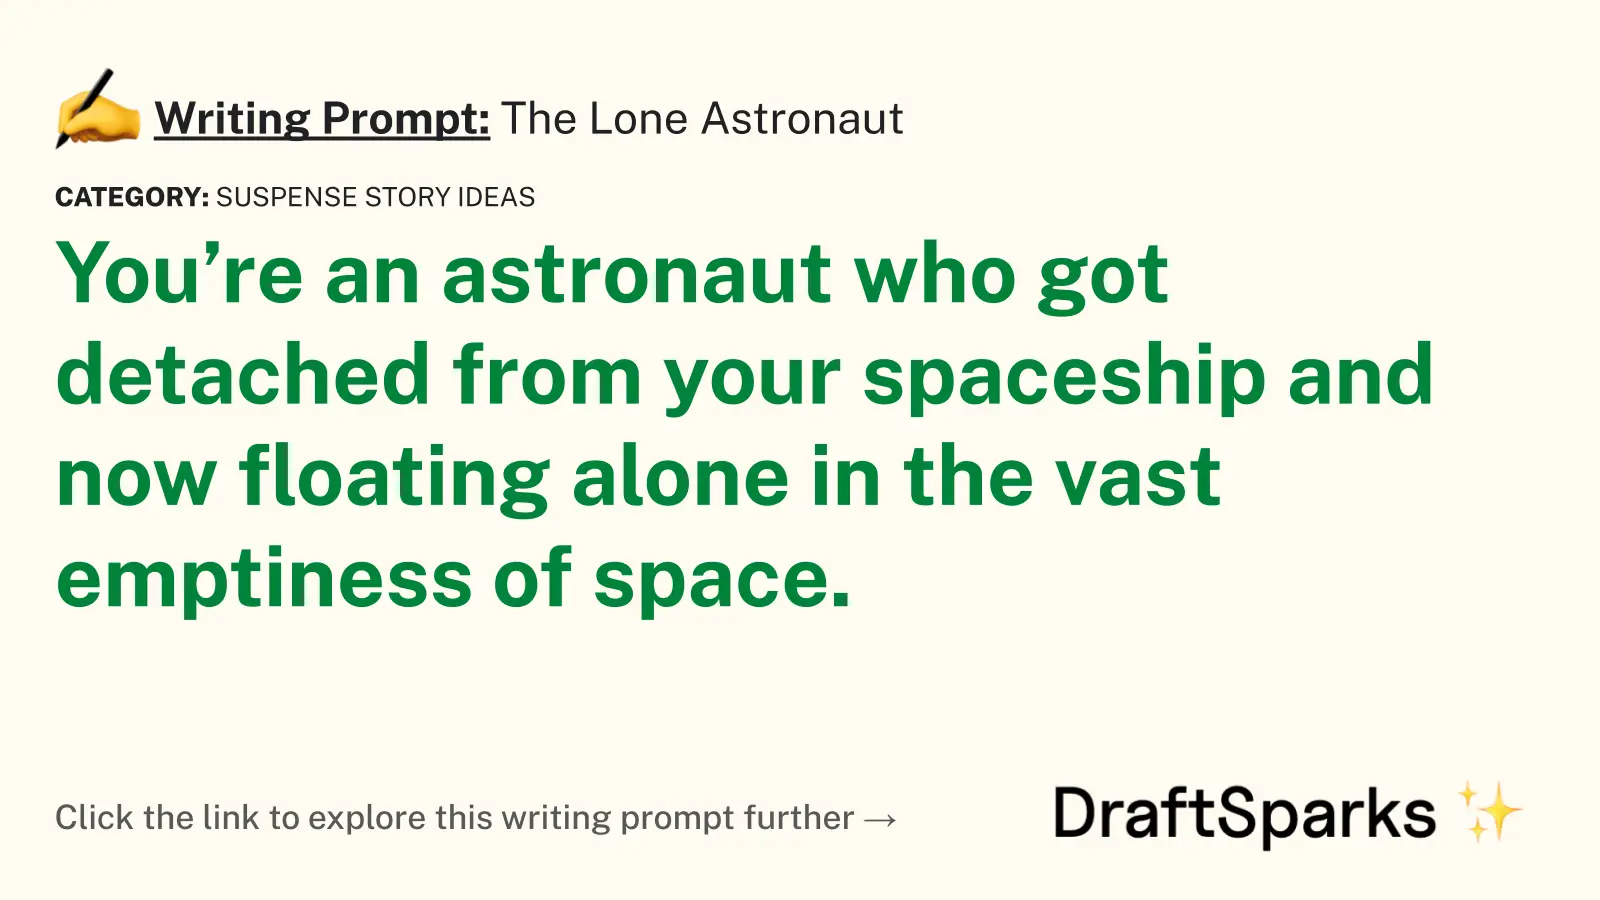 The Lone Astronaut